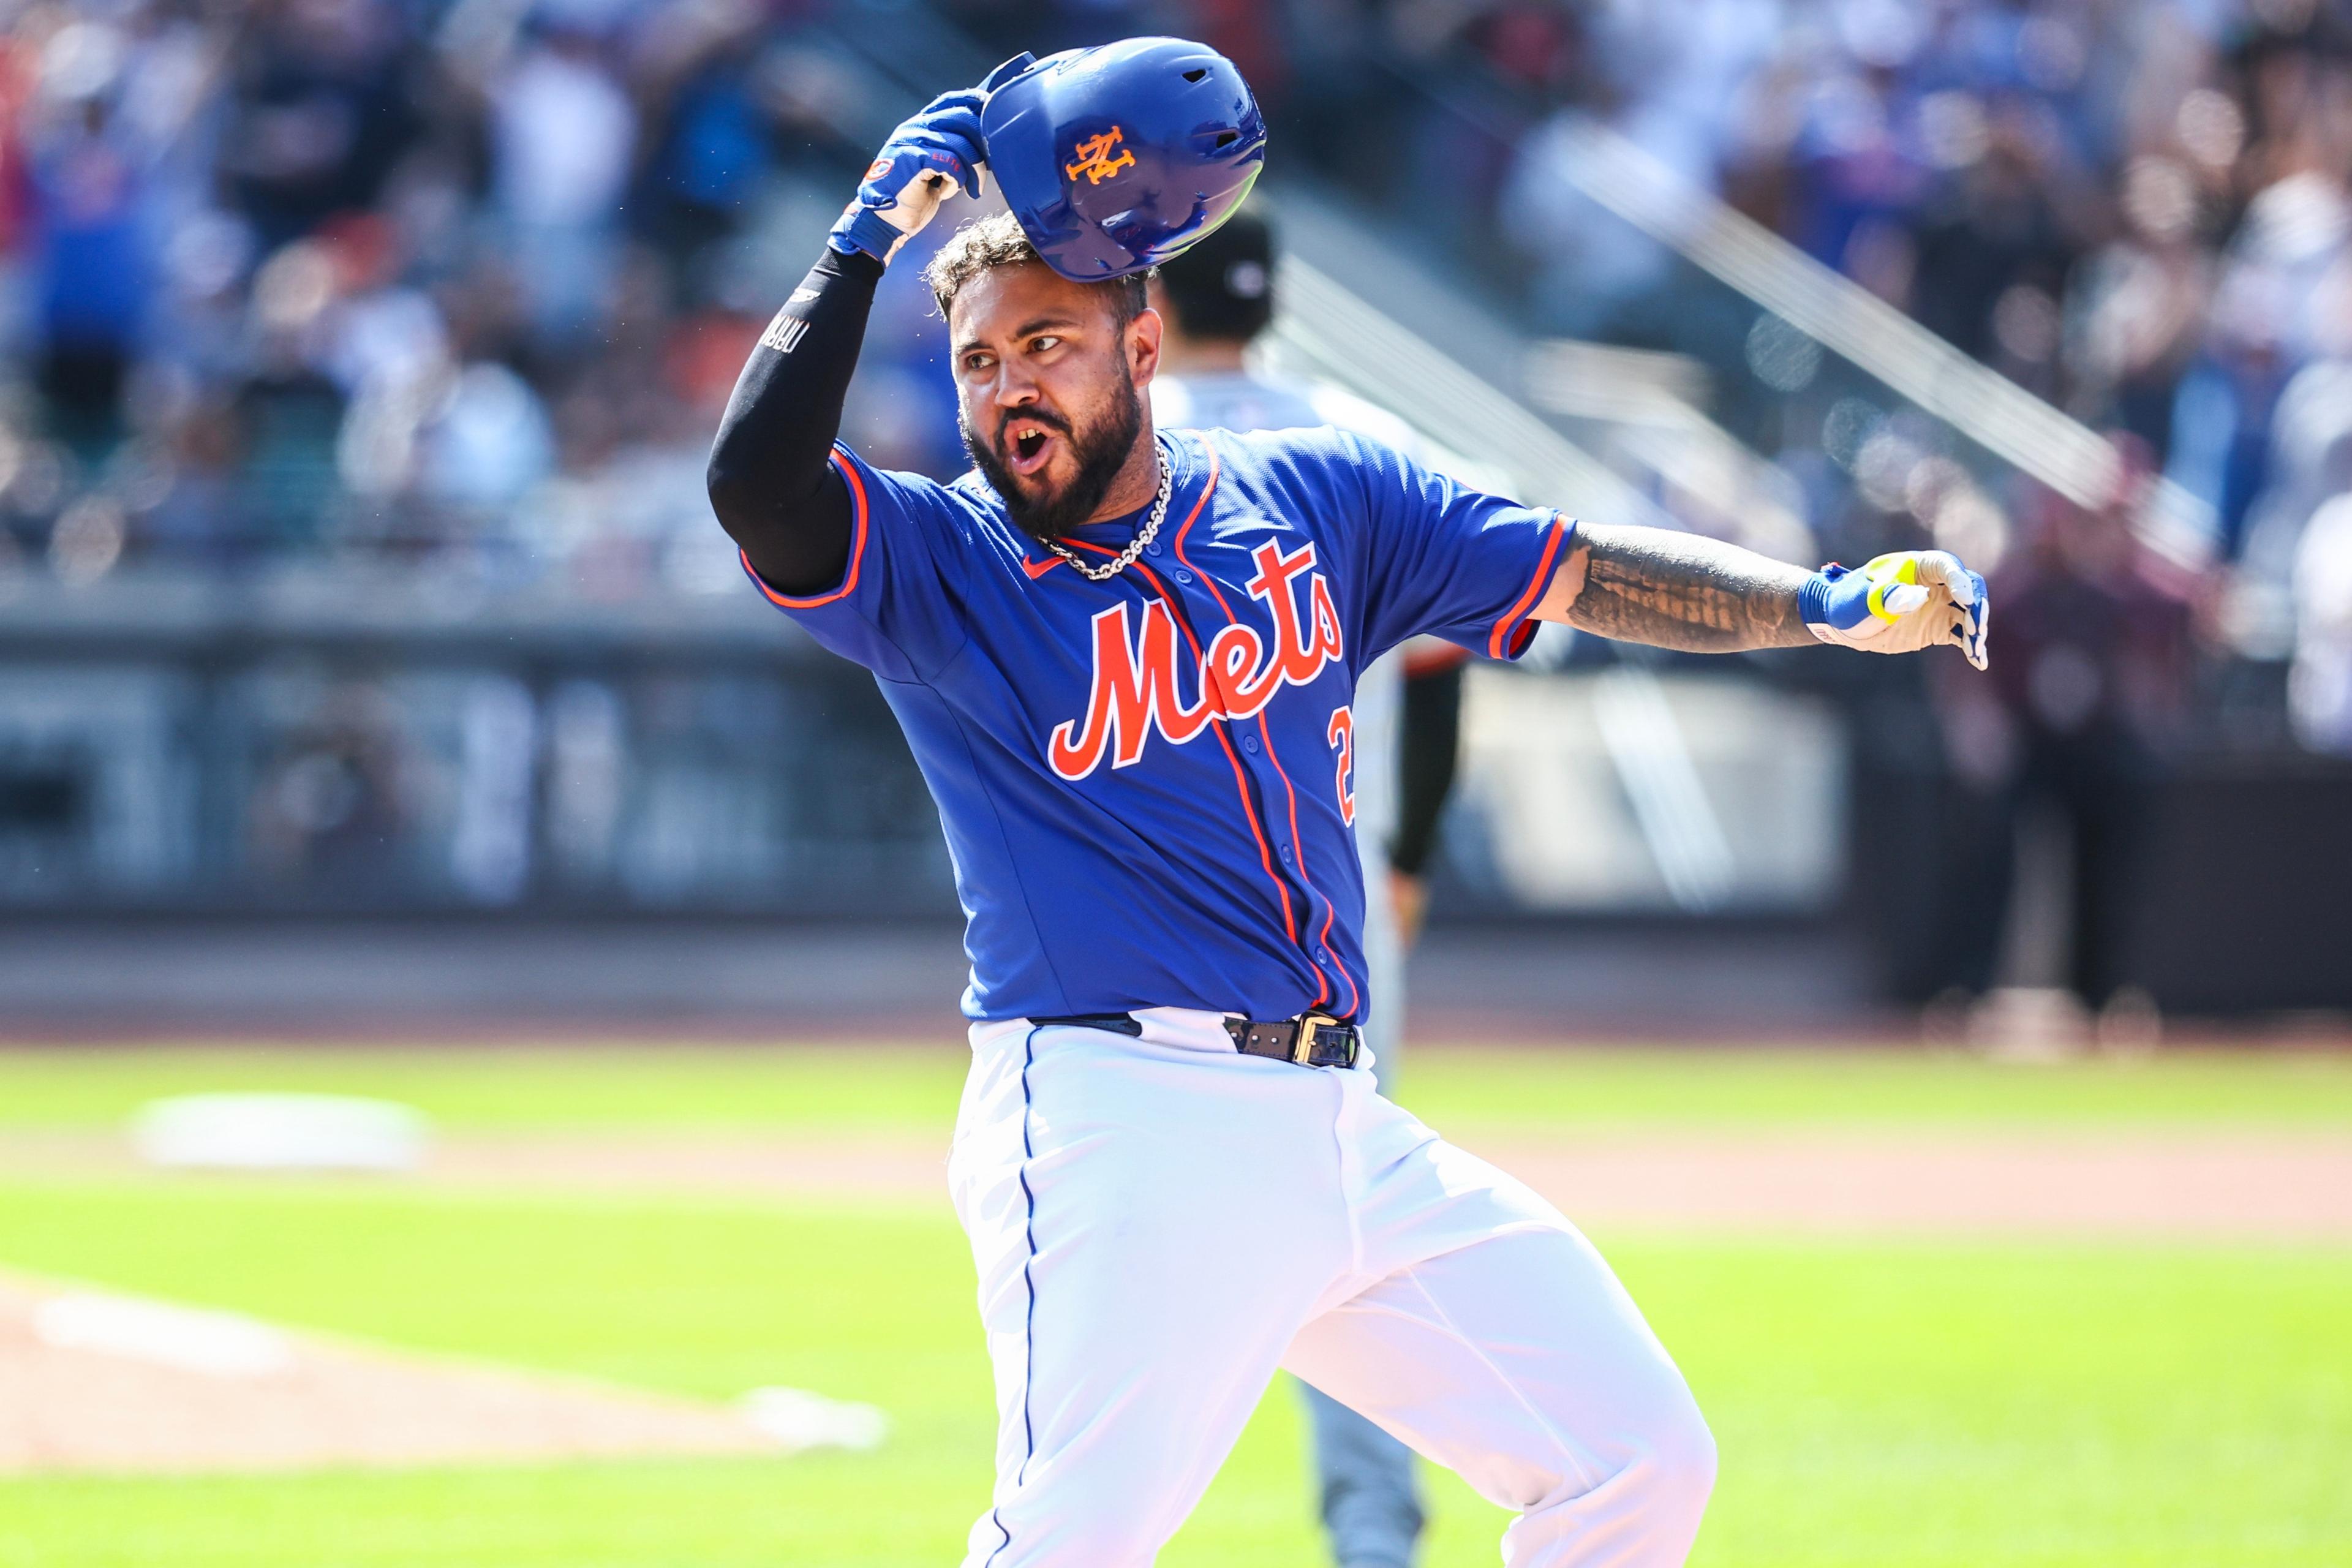 New York Mets catcher Omar Narváez (2) hits a game winning RBI single to defeat the San Francisco Giants 4-3 at Citi Field